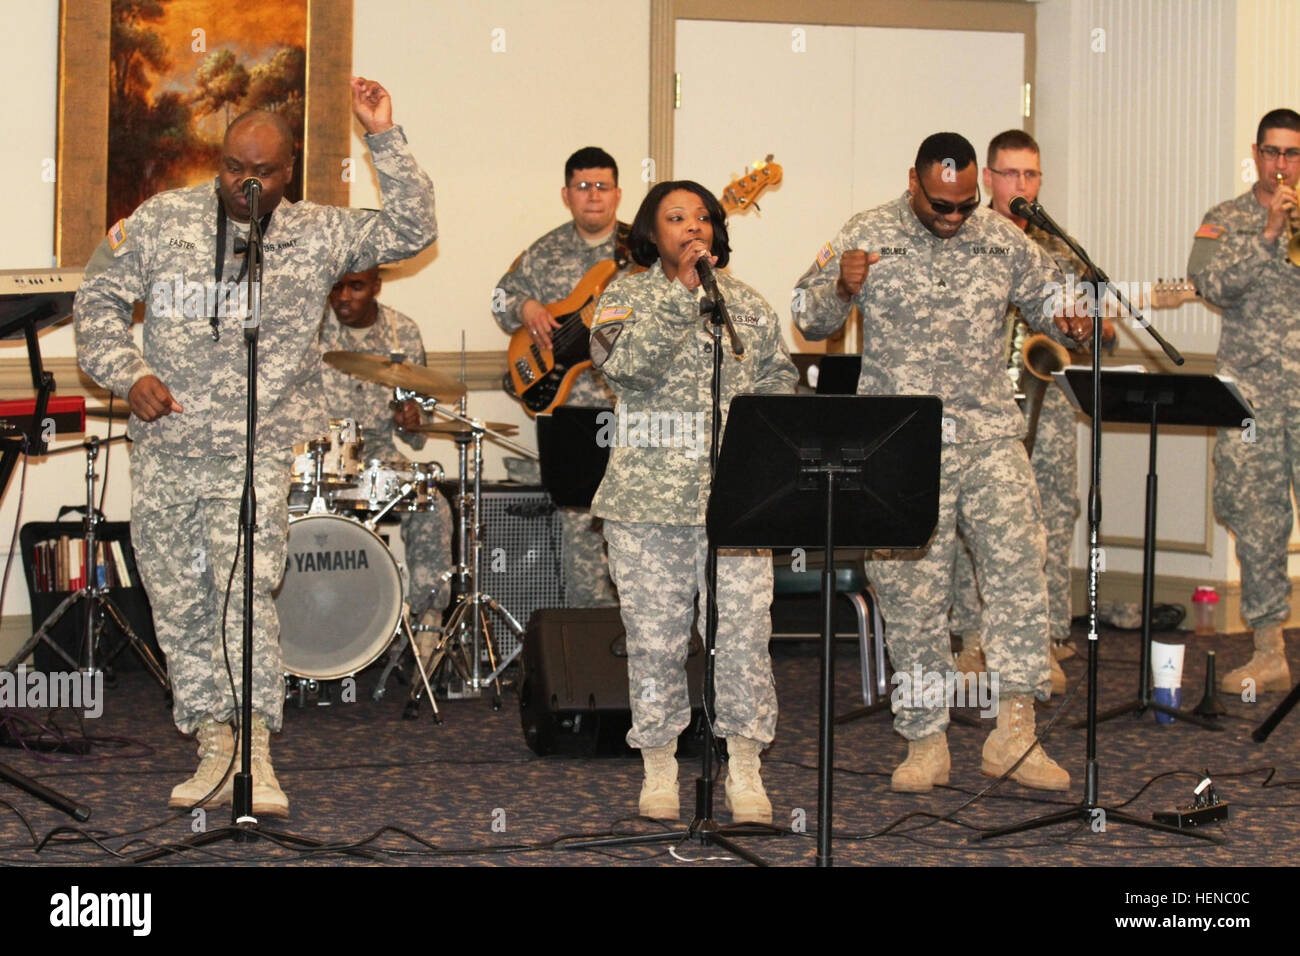 Soldiers sing along in unison with the 'Spur of the Moment' 1st Cavalry Division Jazz Band during the III Corps and 1st Air Cavalry Brigade, 1st Cav. Div.'s equal opportunity offices' 'Strength through Equality' Black History Month observance at Fort Hood, Texas, Feb. 21. During the ceremony, there were recitations of former slave narratives by the Viva Les Arts Theatre and a speech from Carlyle Walton, the president and CEO of Metroplex Adventist Hospital in Killeen, Texas. The event also featured a guest appearance from retired Lt. Col. Granville Coggs, one of an estimated 50 remaining Tuske Stock Photo